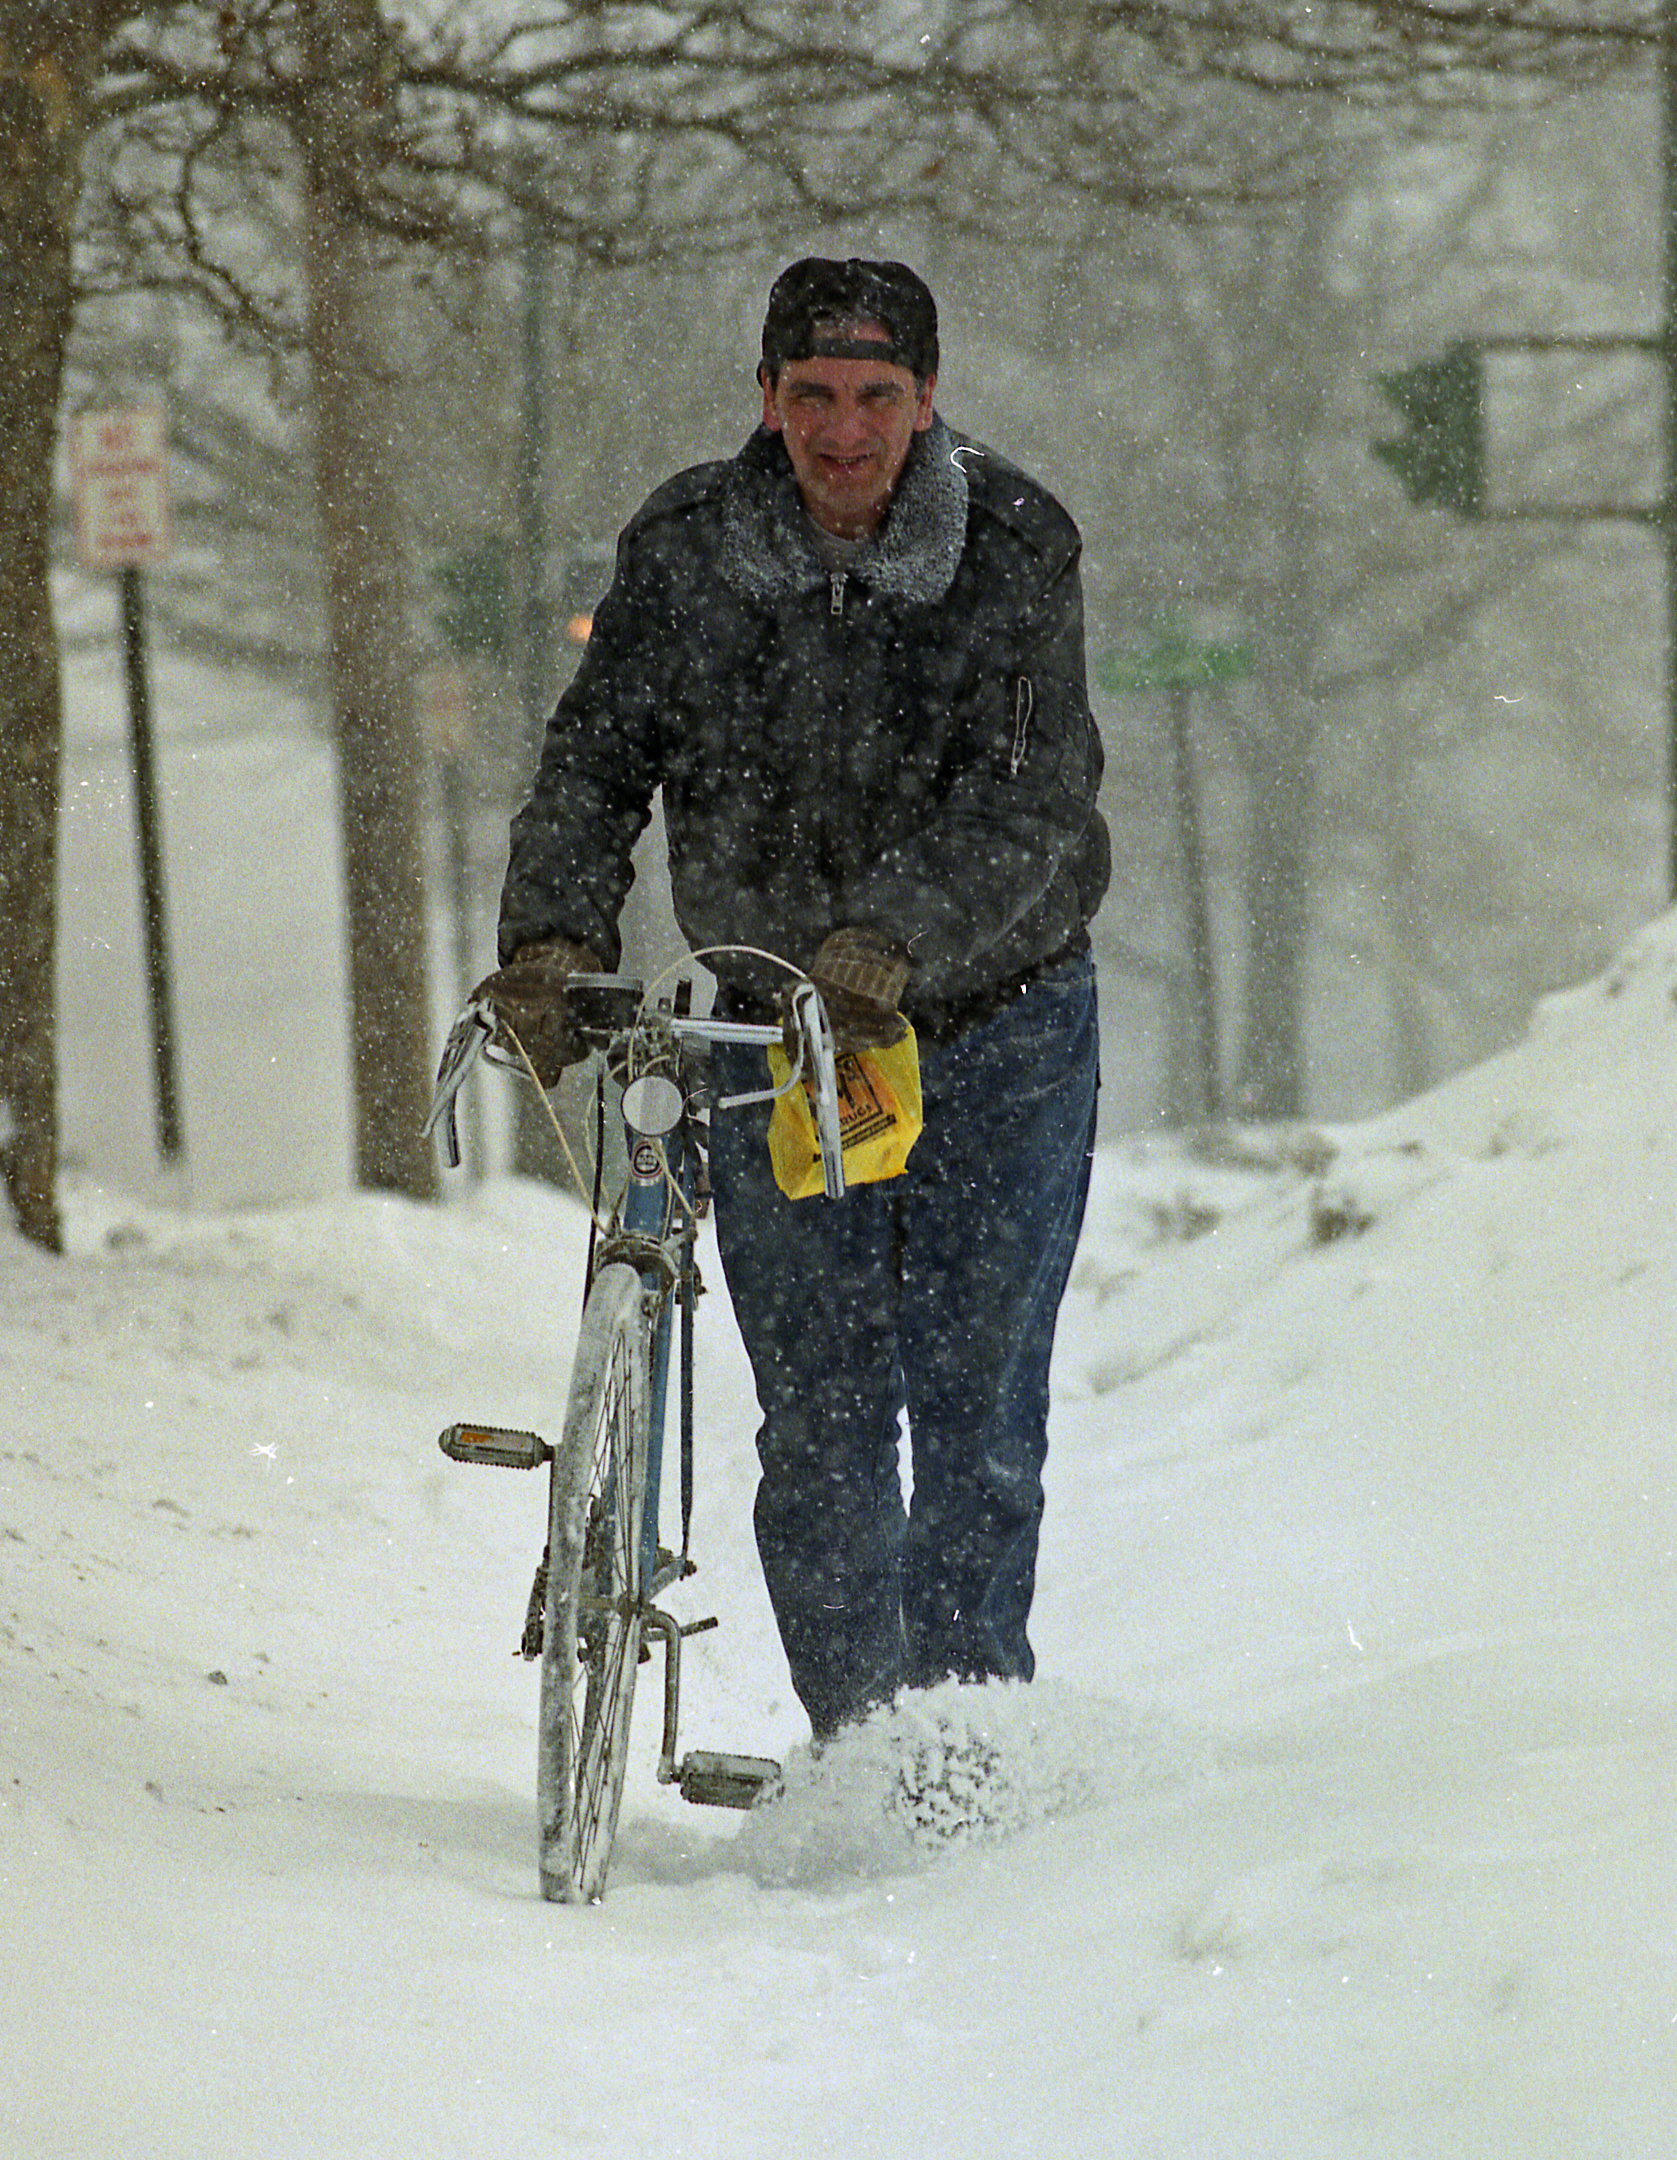 John Managan, who works at the Public Safety Building, walks his bike through the snow after work on James Street, Syracuse.  He was able to ride it to work earlier in the day. During the Blizzard of 1993.